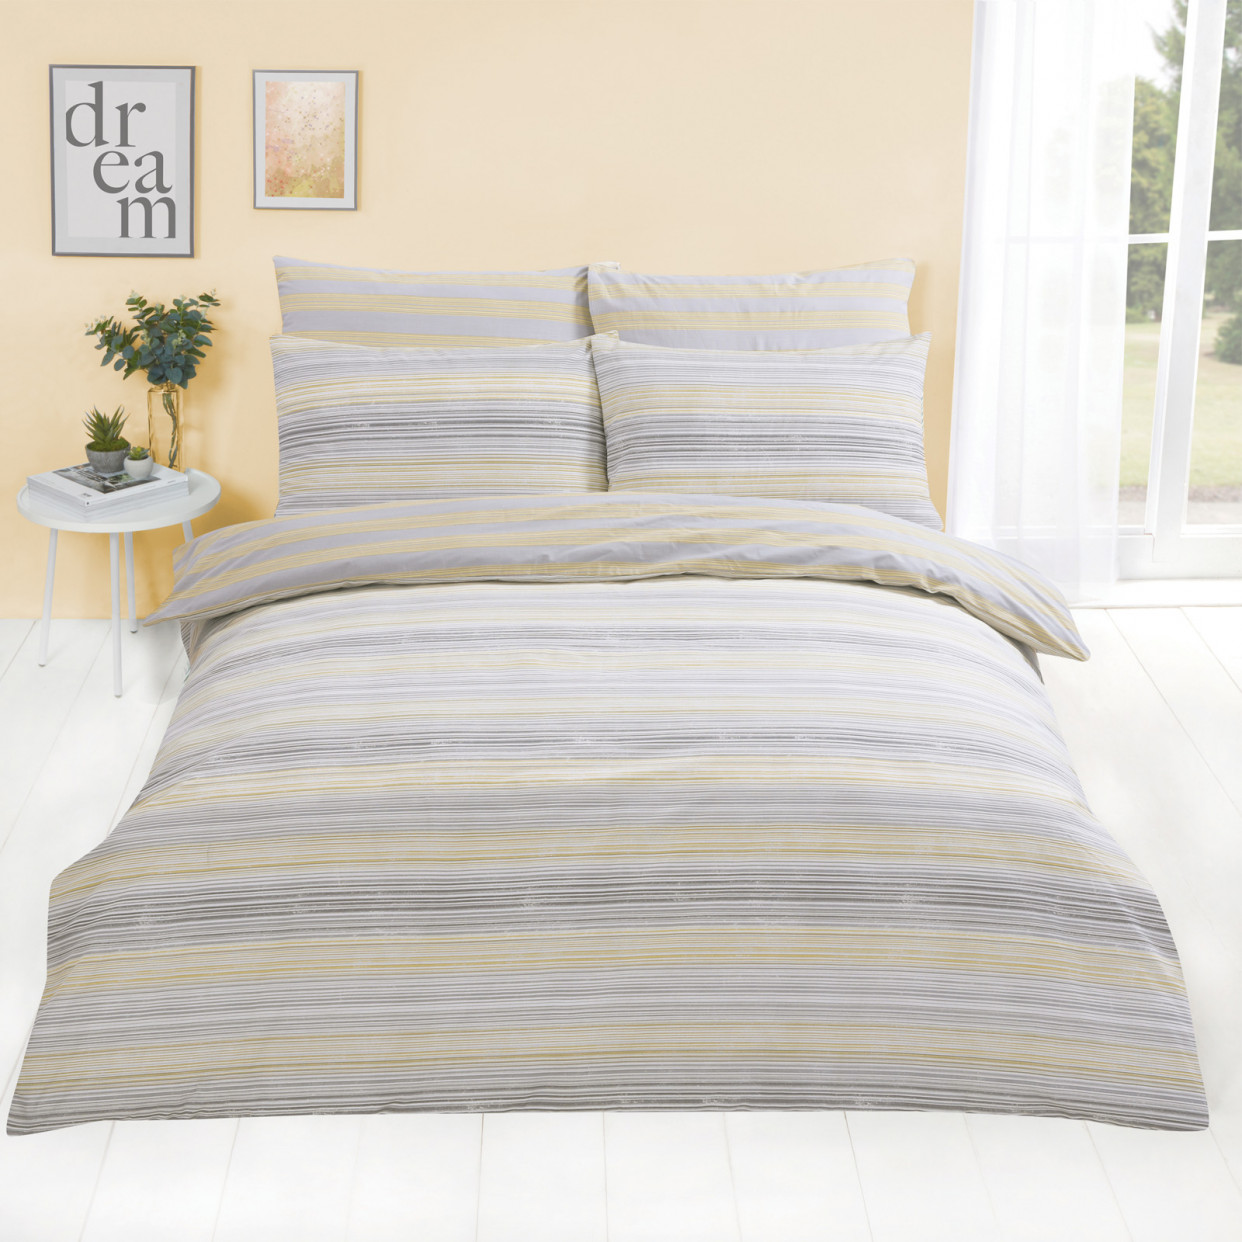 Dreamscene Speckle Stripe Duvet Cover with Pillowcase, Yellow - King>